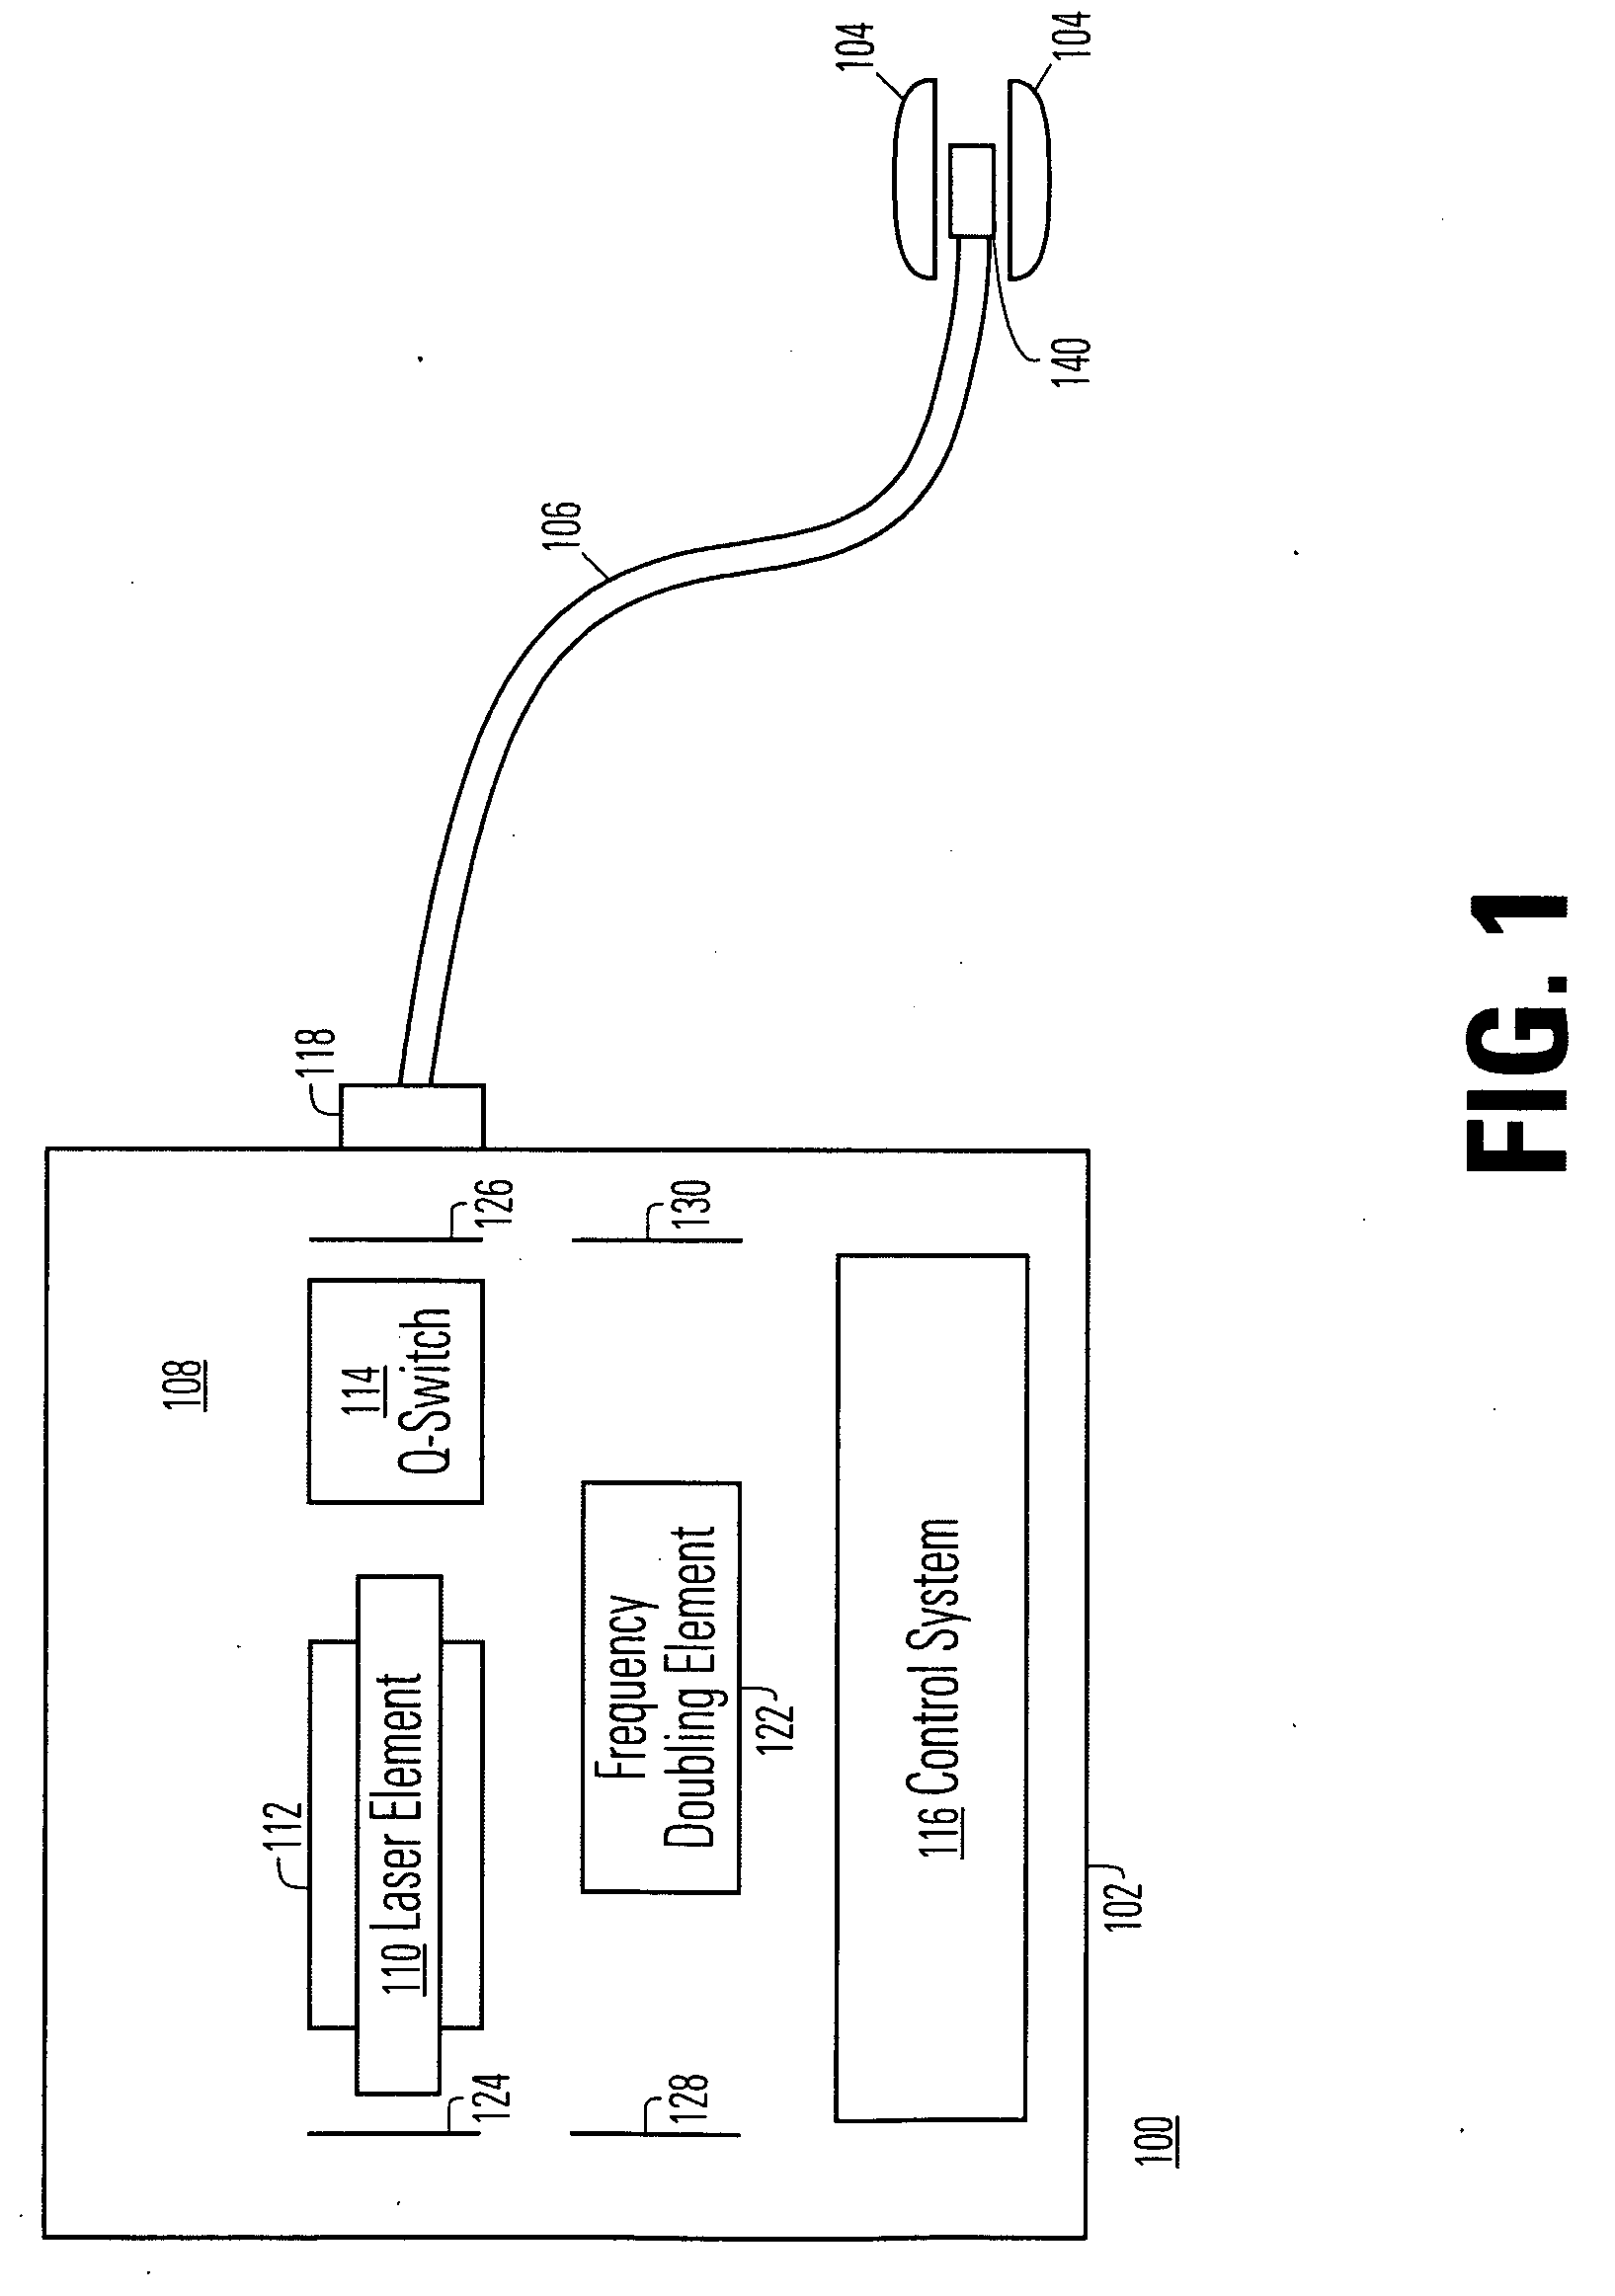 Method and system for photoselective vaporization for gynecological treatments